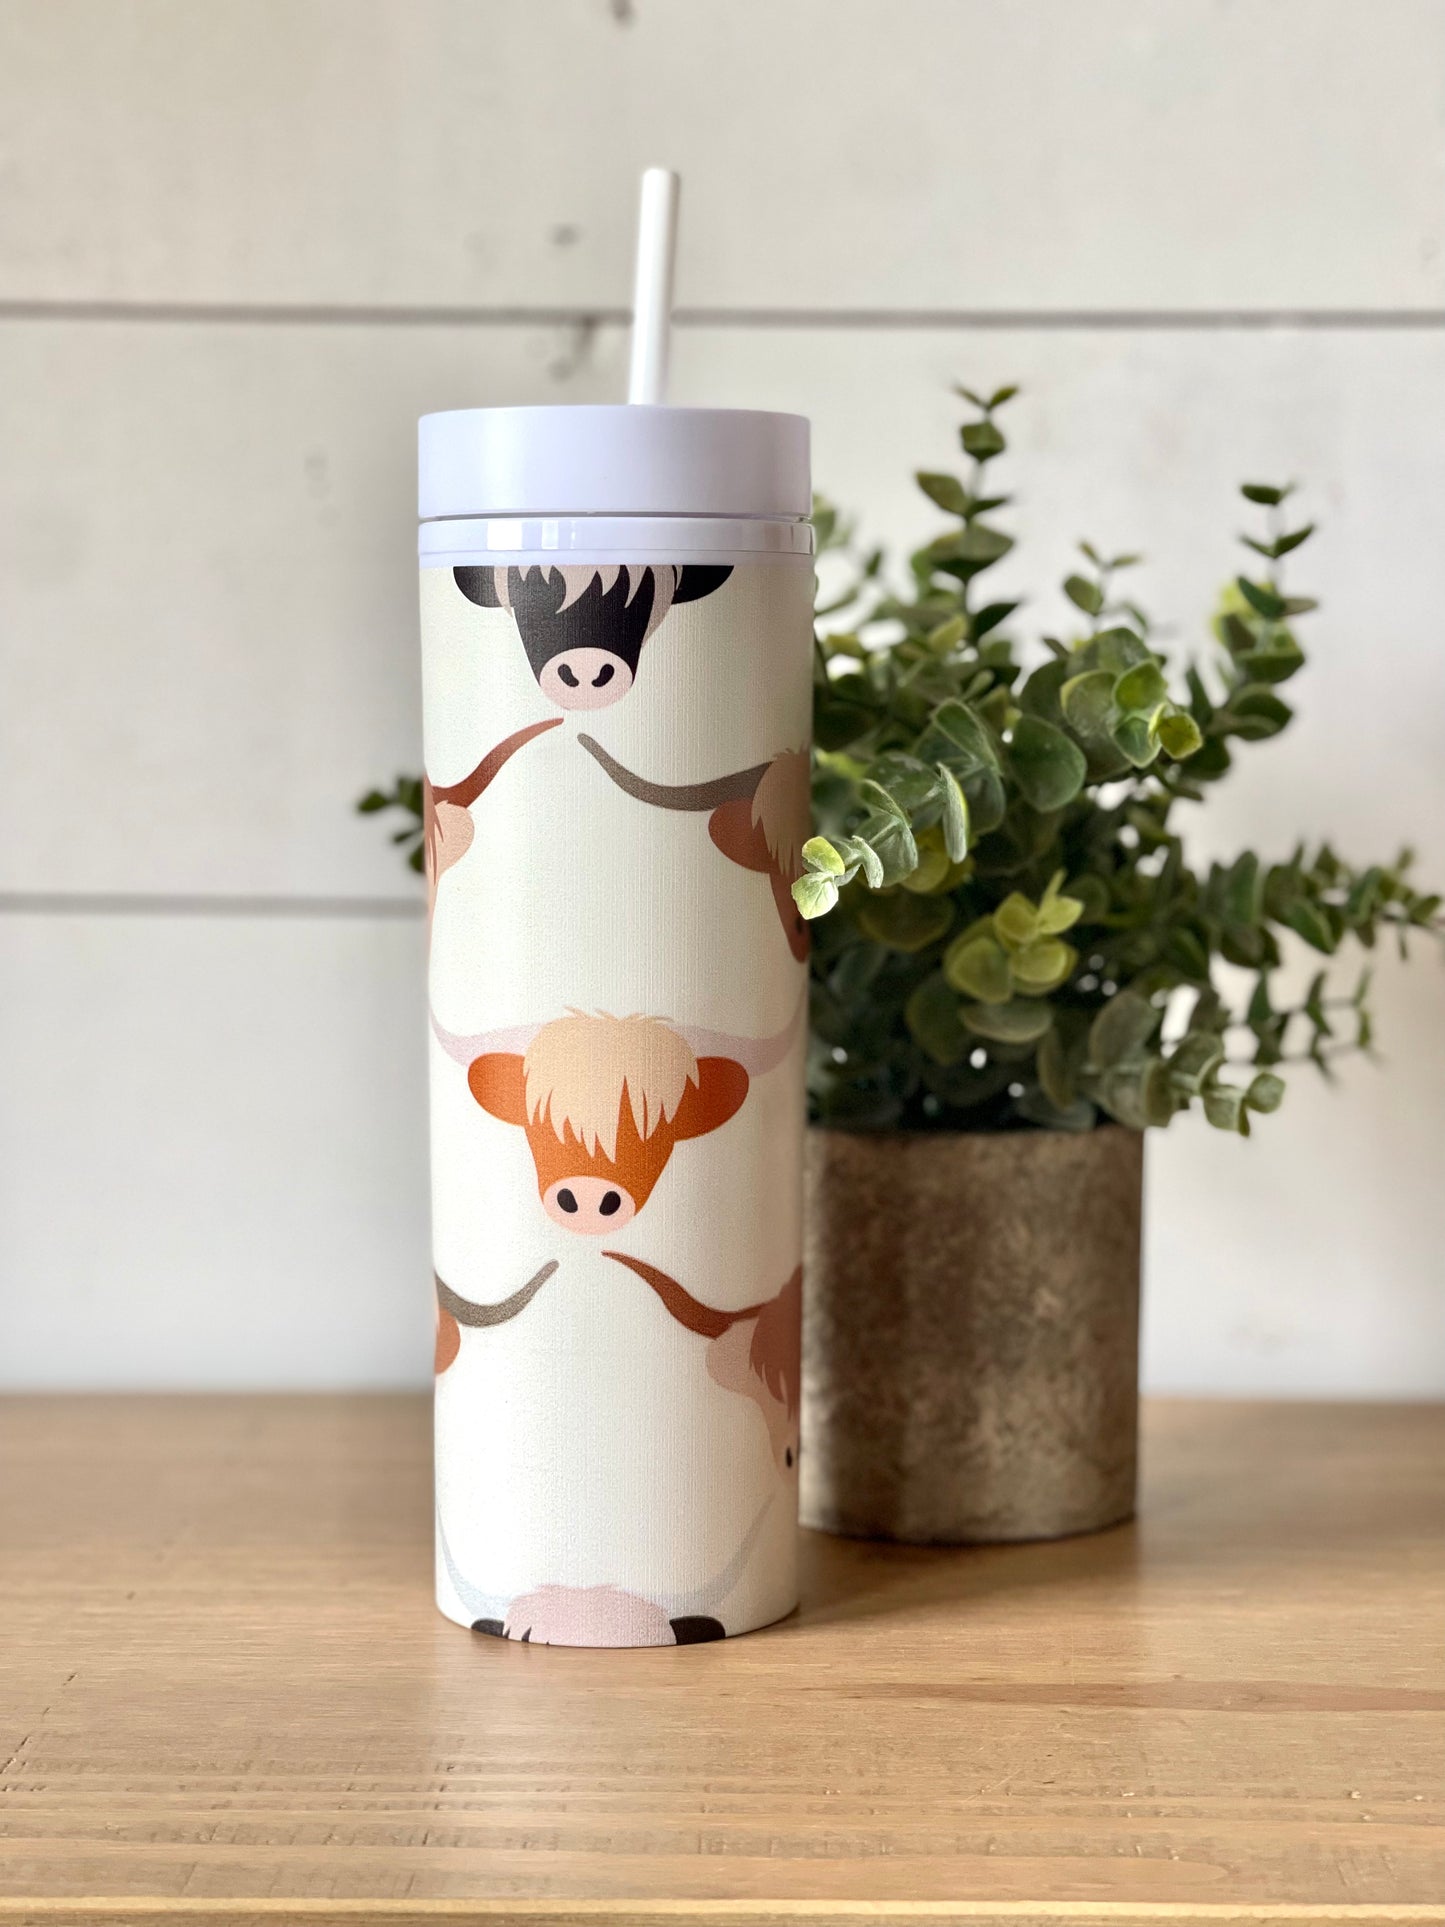 Fluffy Highland Cow Pattern Personalized Skinny Tumbler with Lid and Straw, 16 oz Matte Black Acrylic Tumbler Insulated Double Wall Plastic Reusable Cups